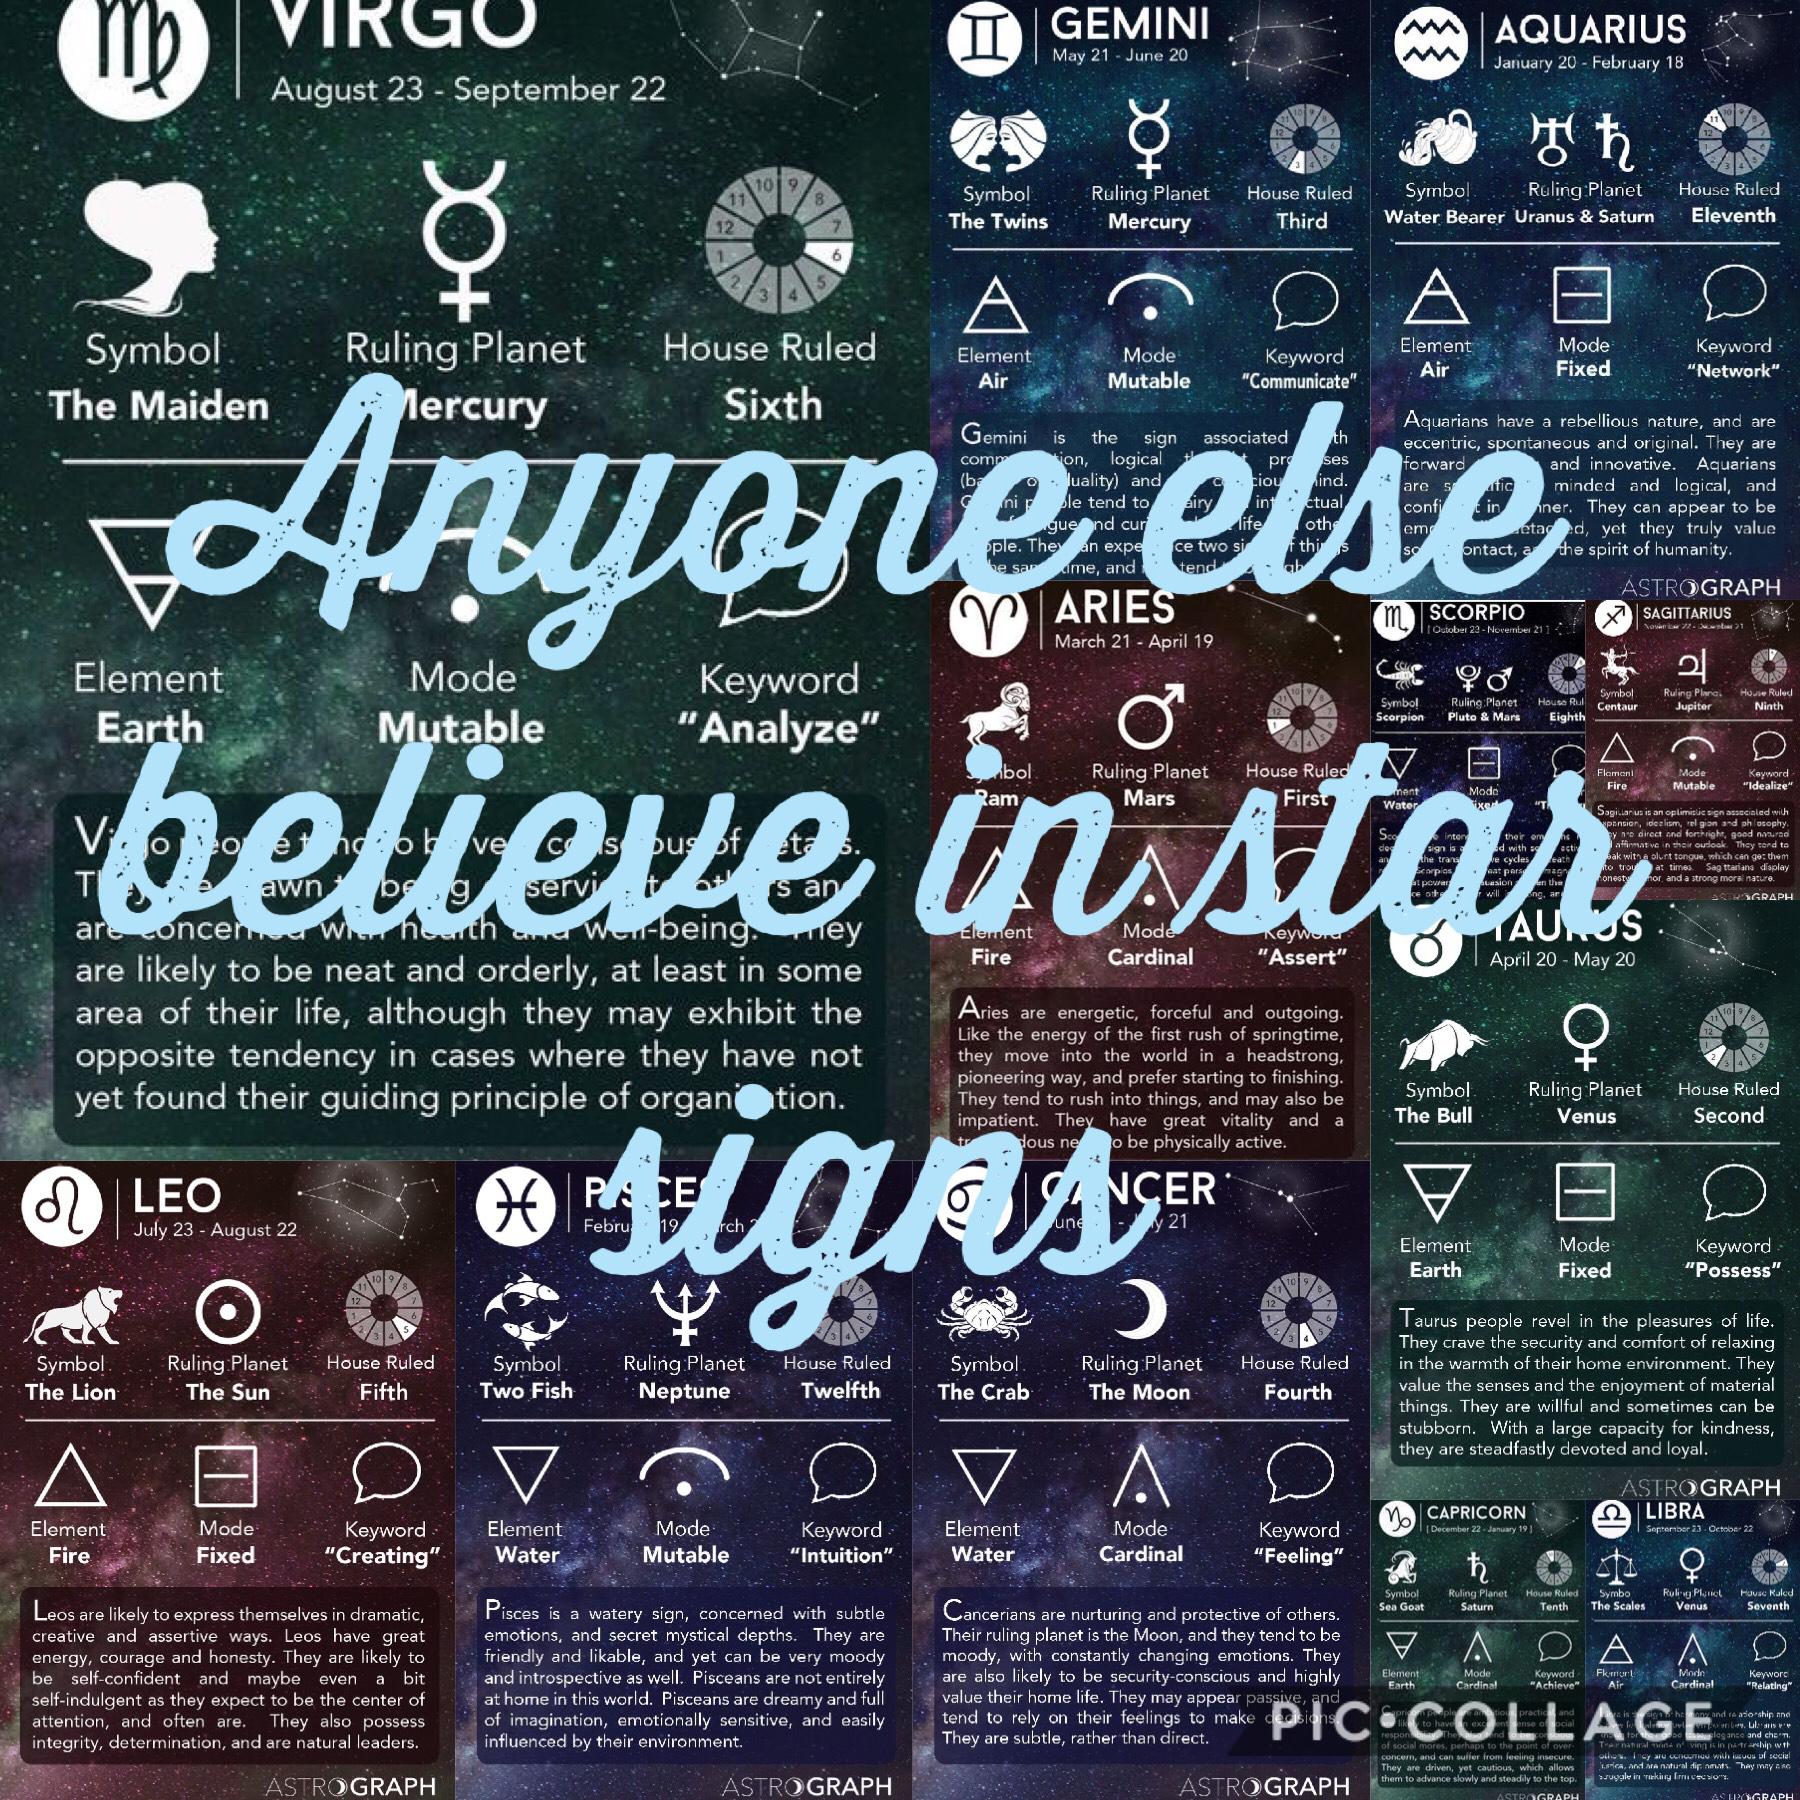 I’m a Virgo, what star sign are you